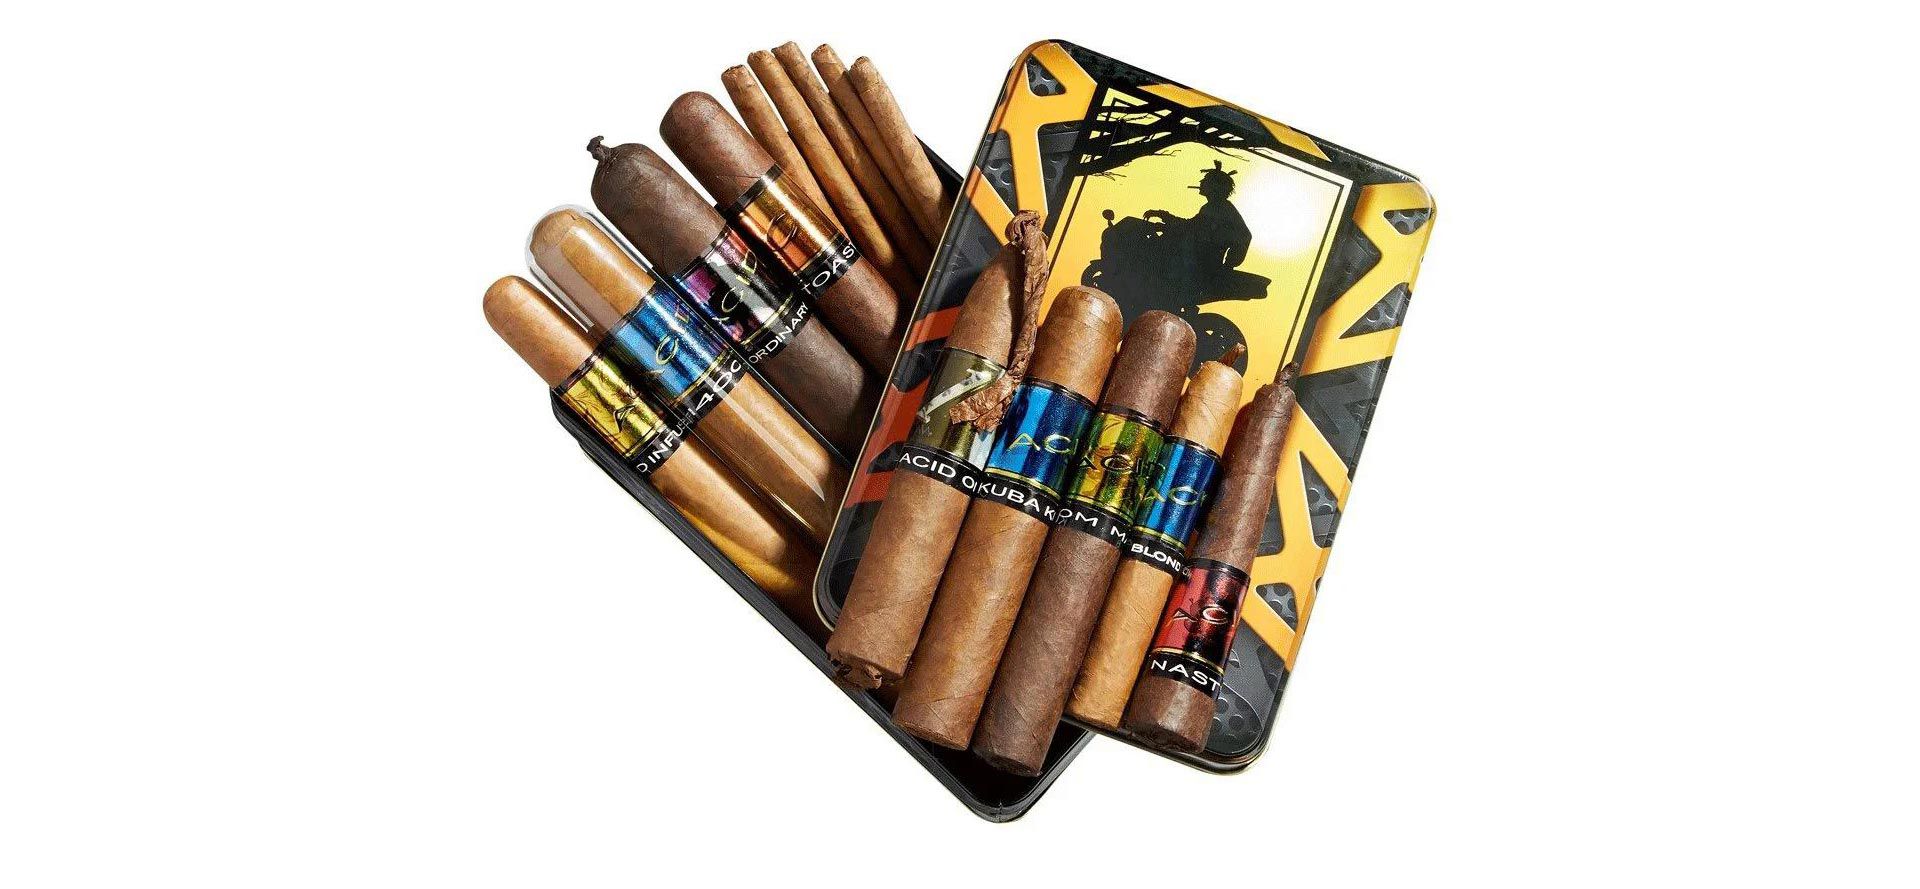 Cheap Flavored Cigars.